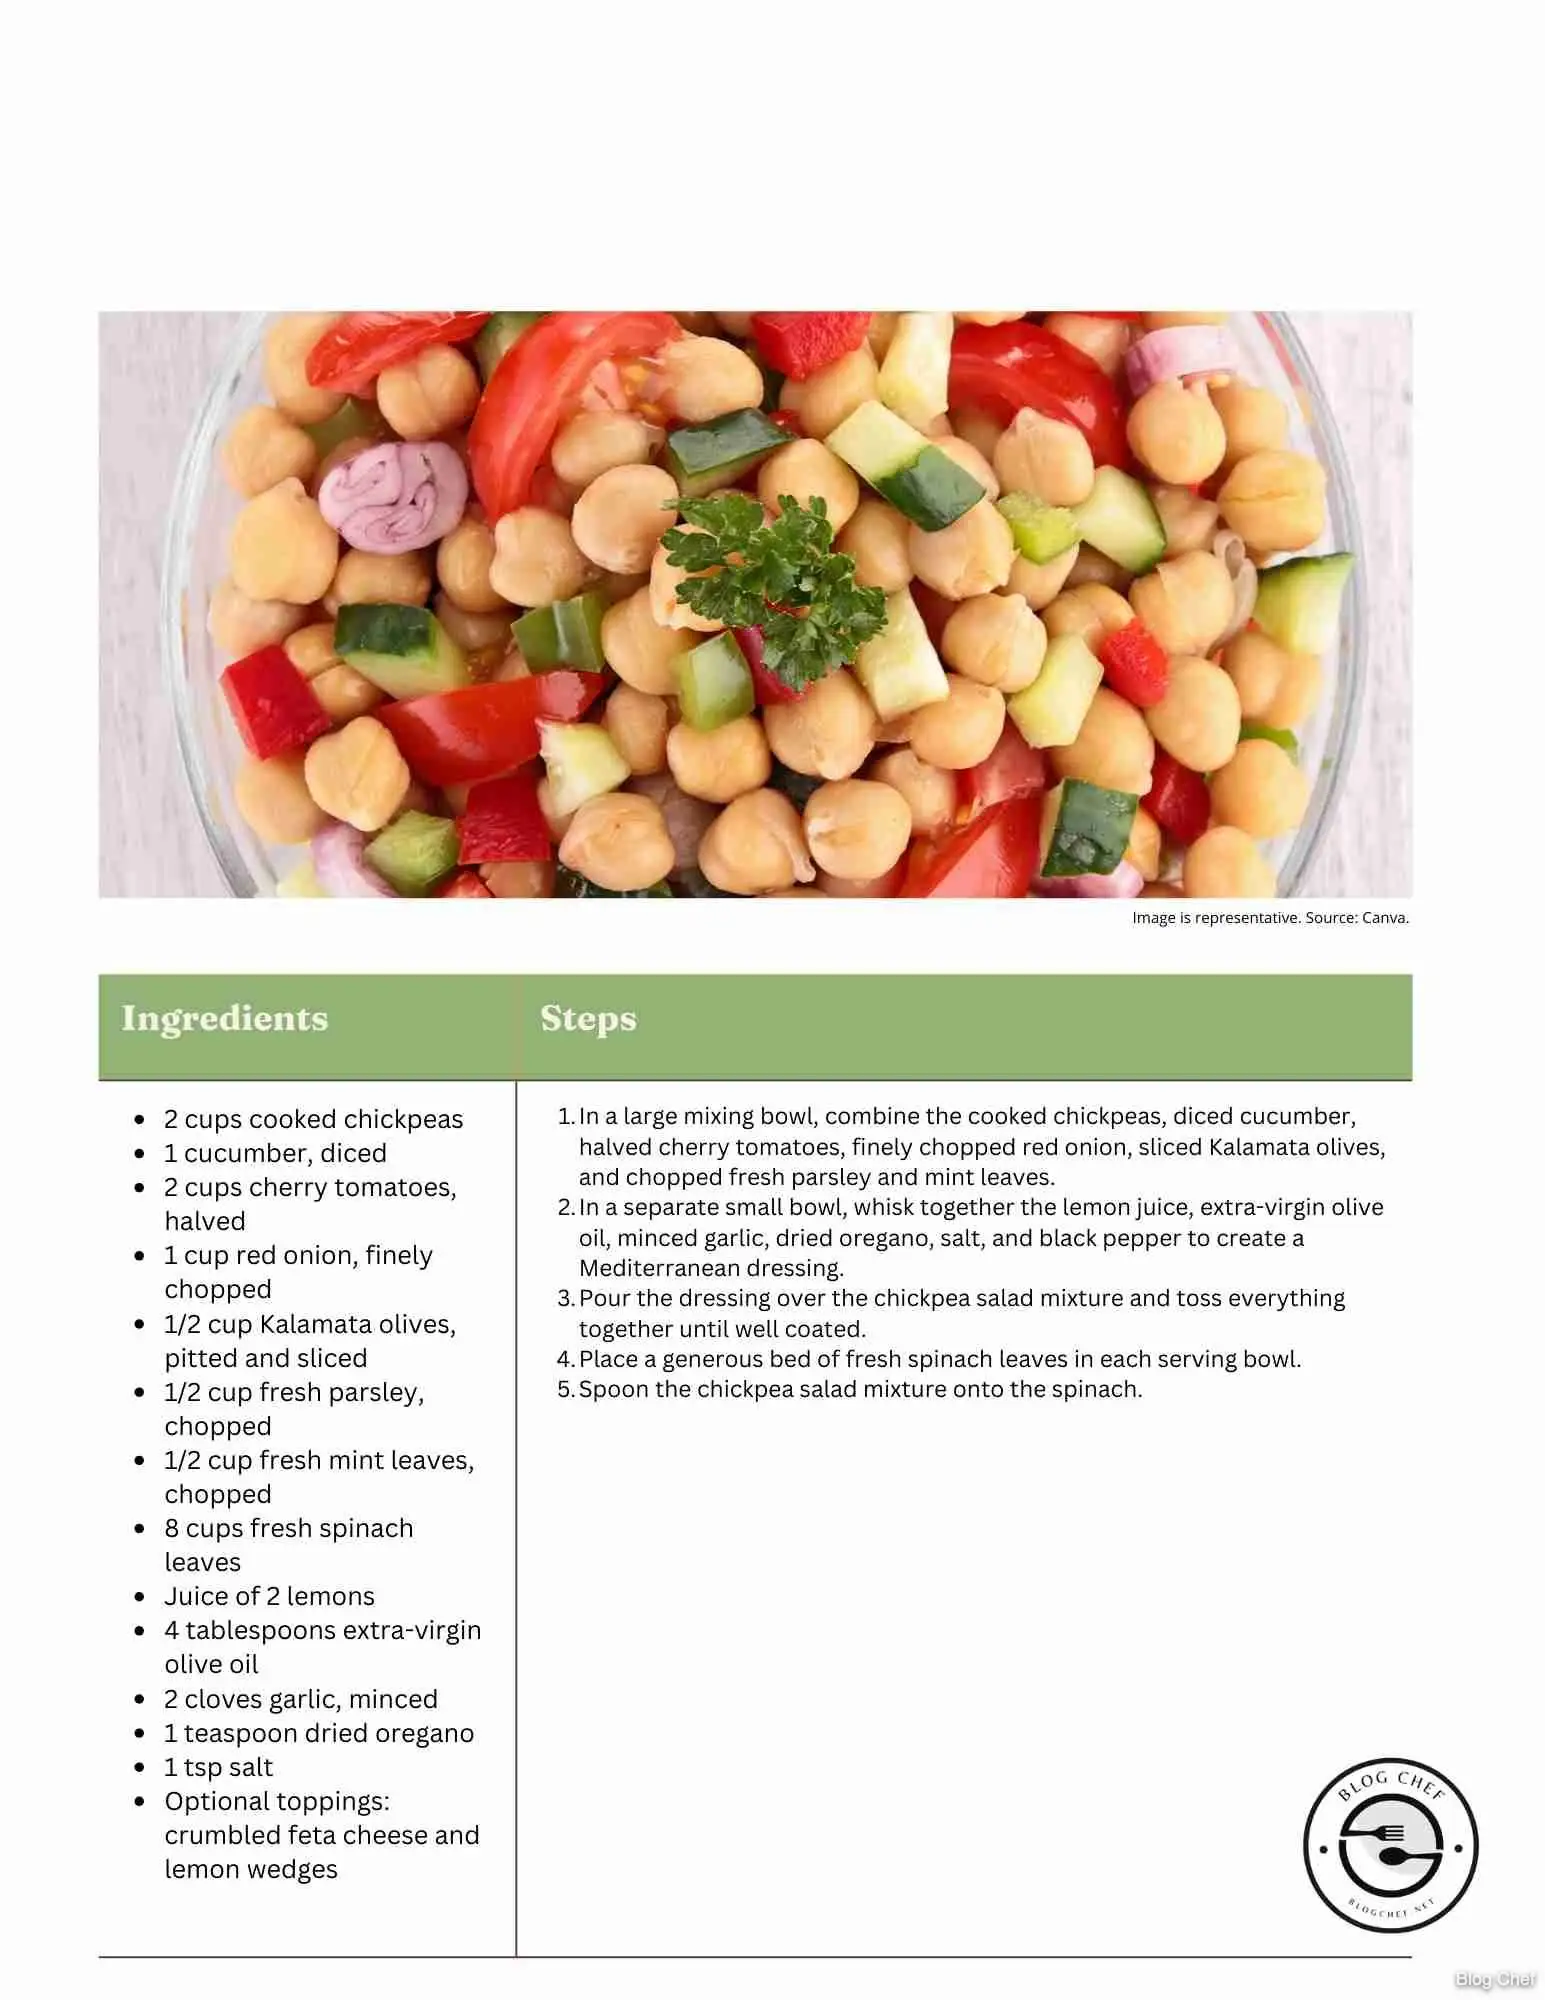 Recipe card for chickpea salad.